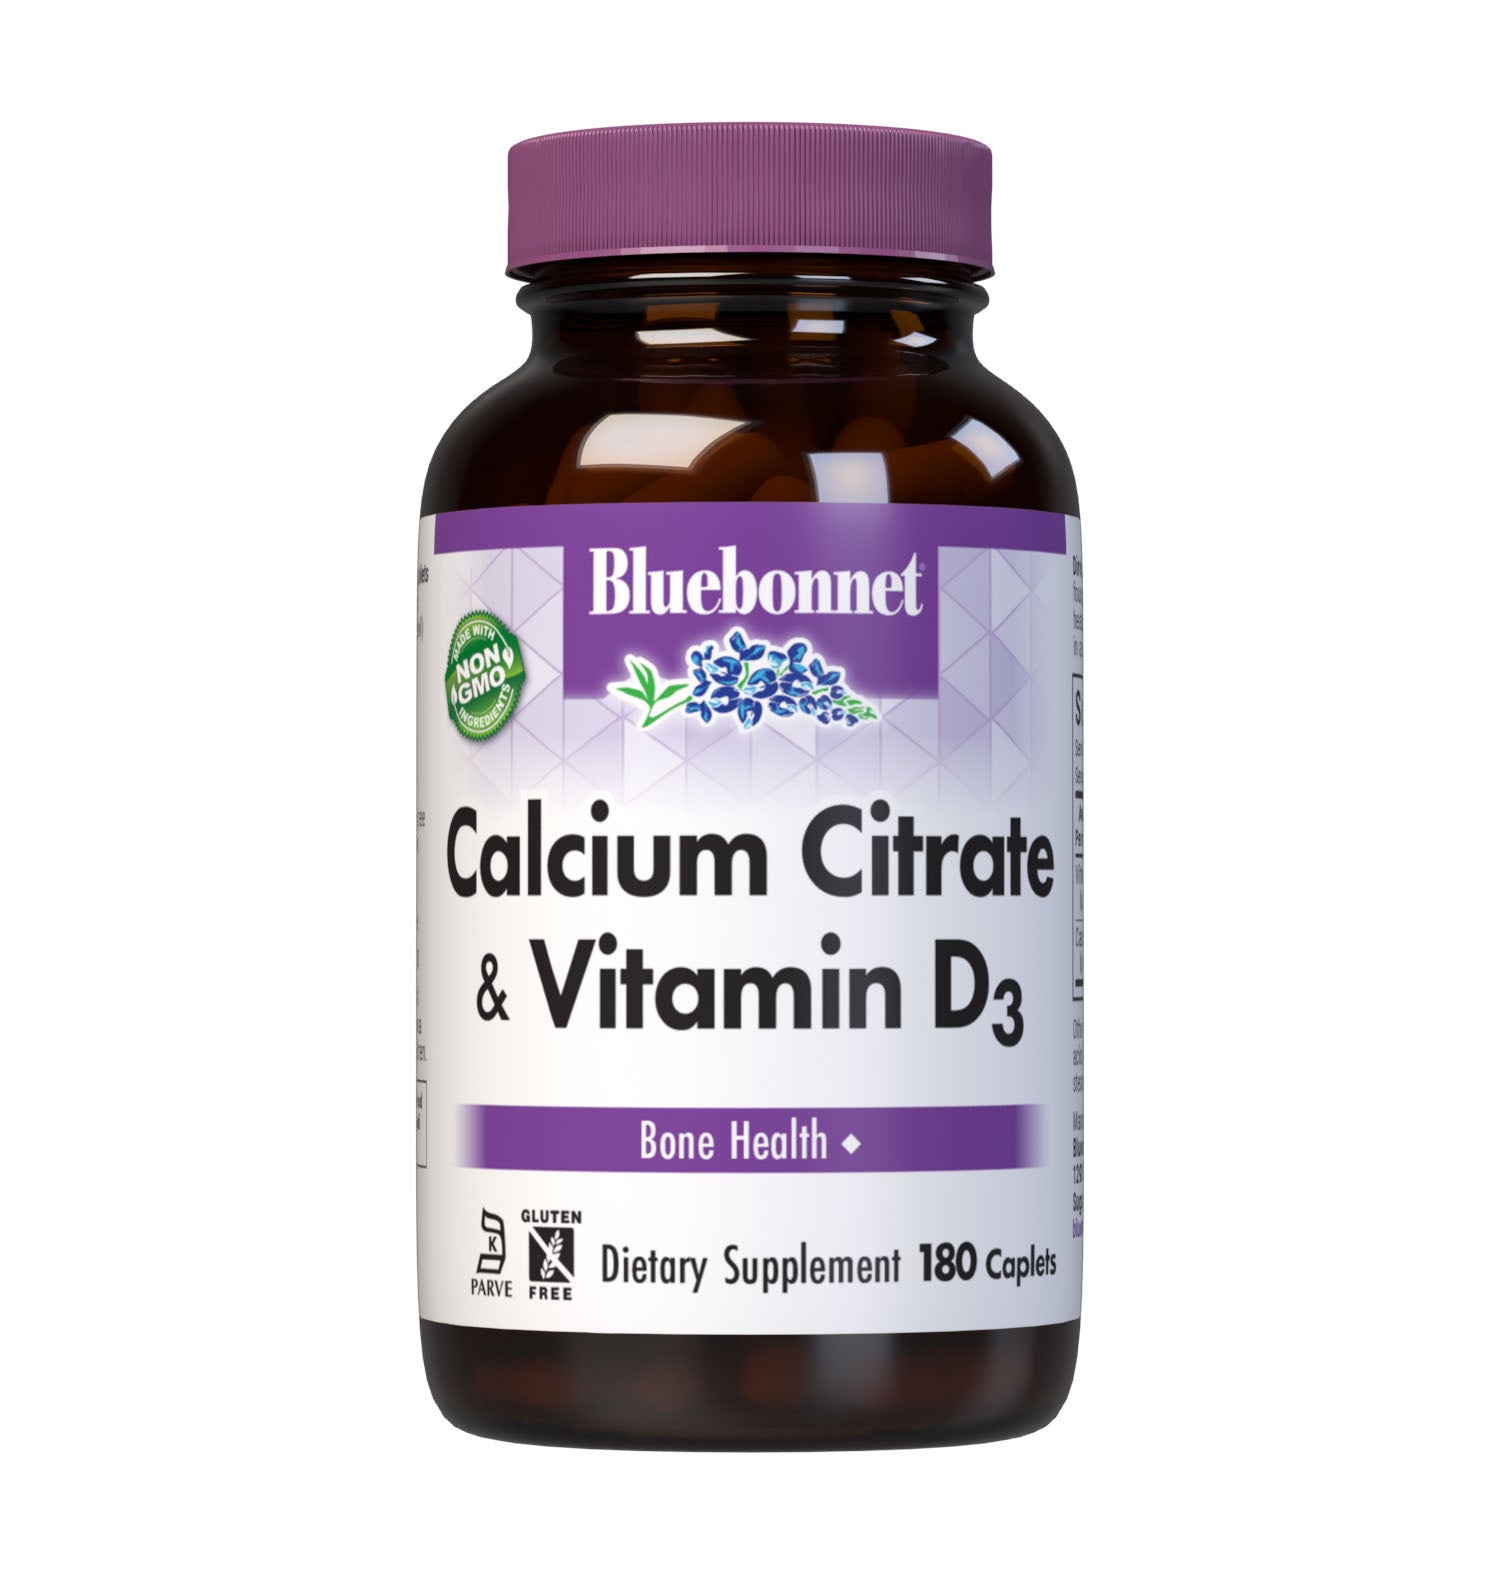 Bluebonnet's Calcium Citrate and Vitamin D3 180 Caplets are formulated with calcium in a chelate of calcium citrate and vitamin D3 (cholecalciferol) from lanolin for strong, healthy bones. #size_180 count